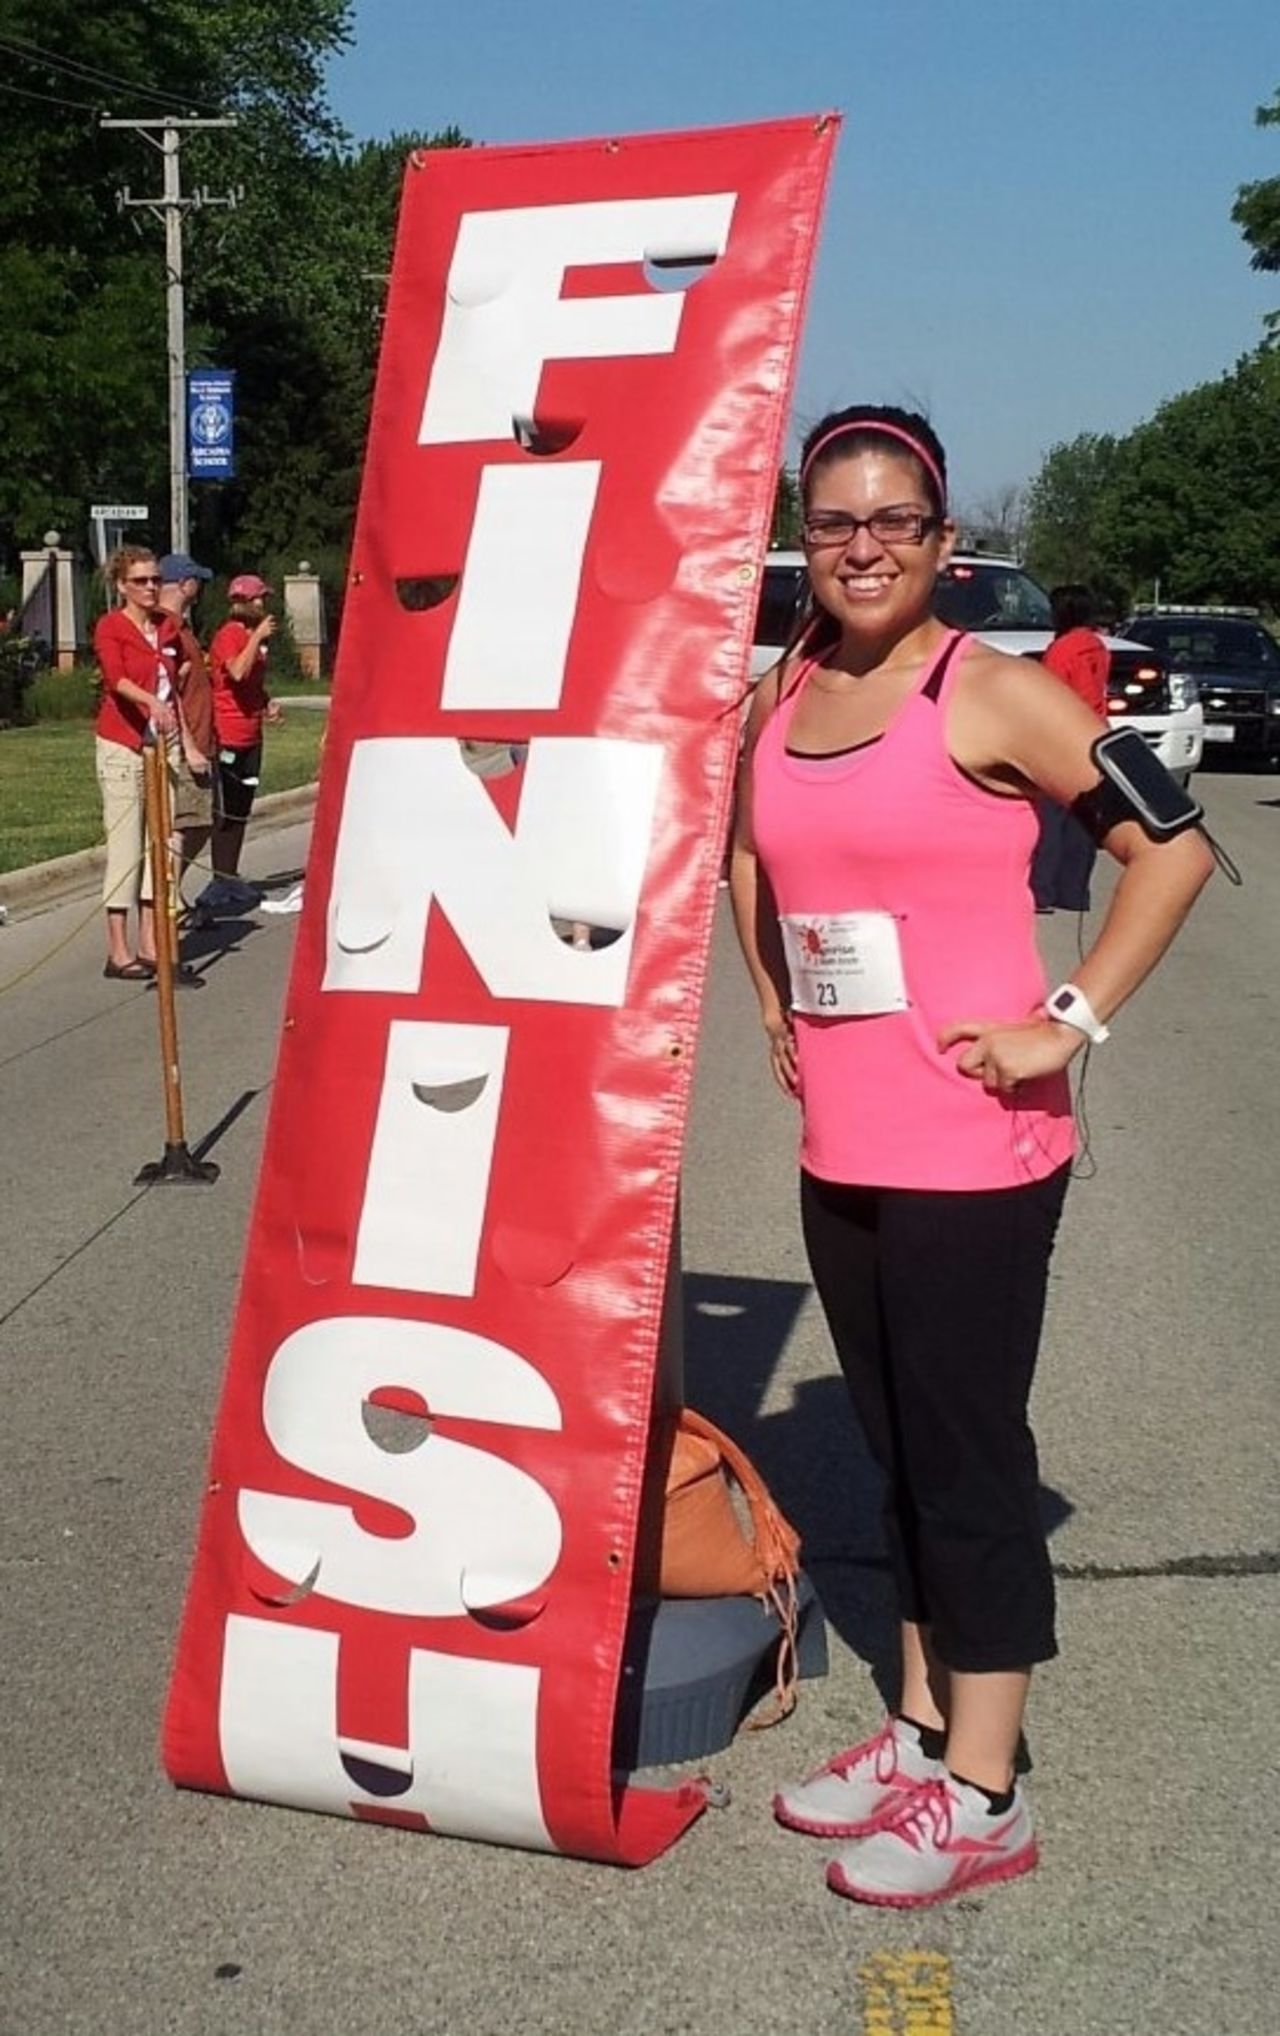 Garcia completed her first 5K race in 27 minutes in May 2012.